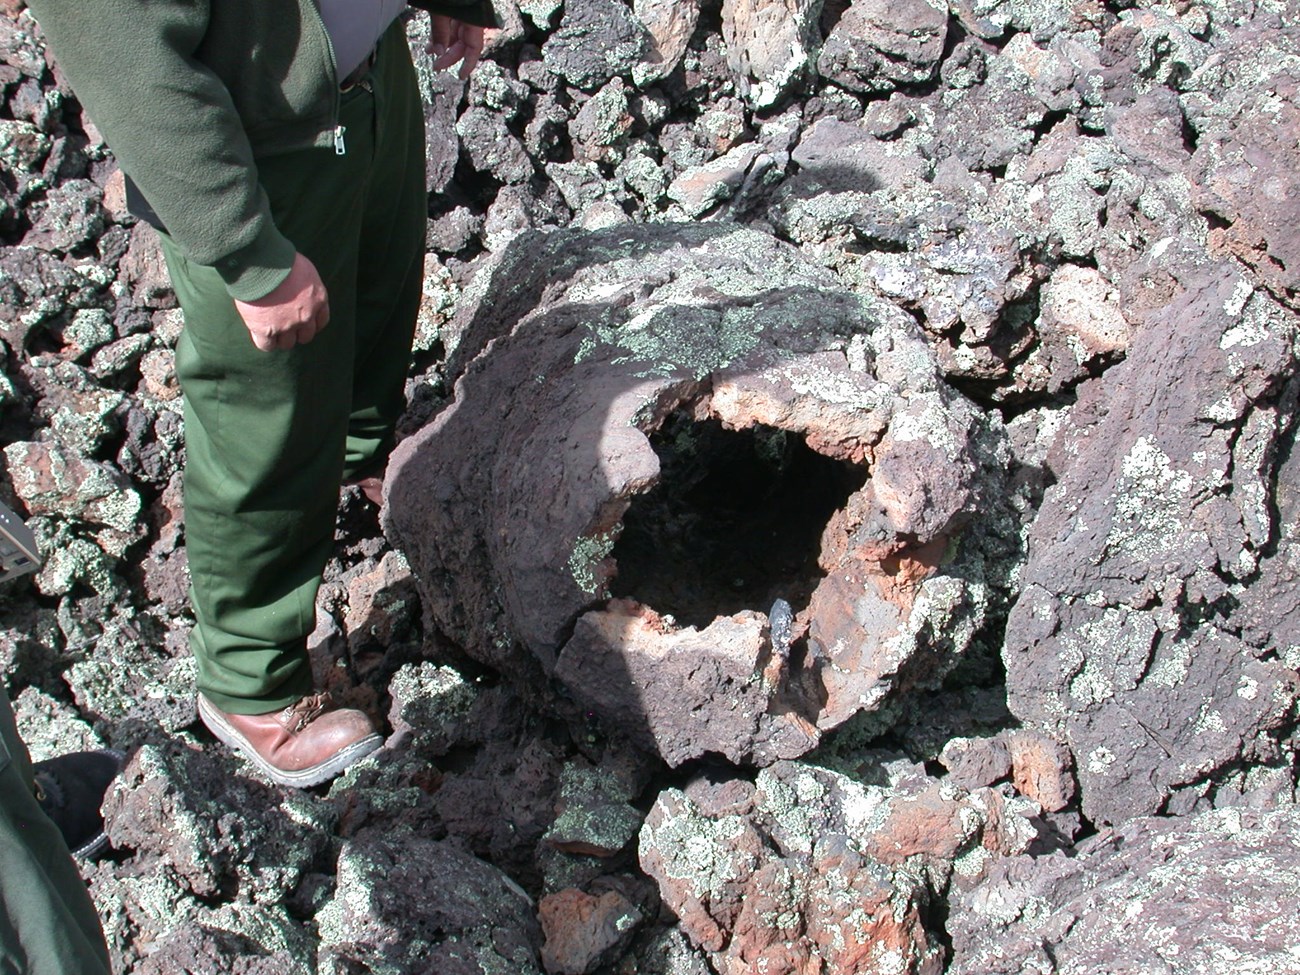 photo of a ringer standing by a round hole in a rocky surface